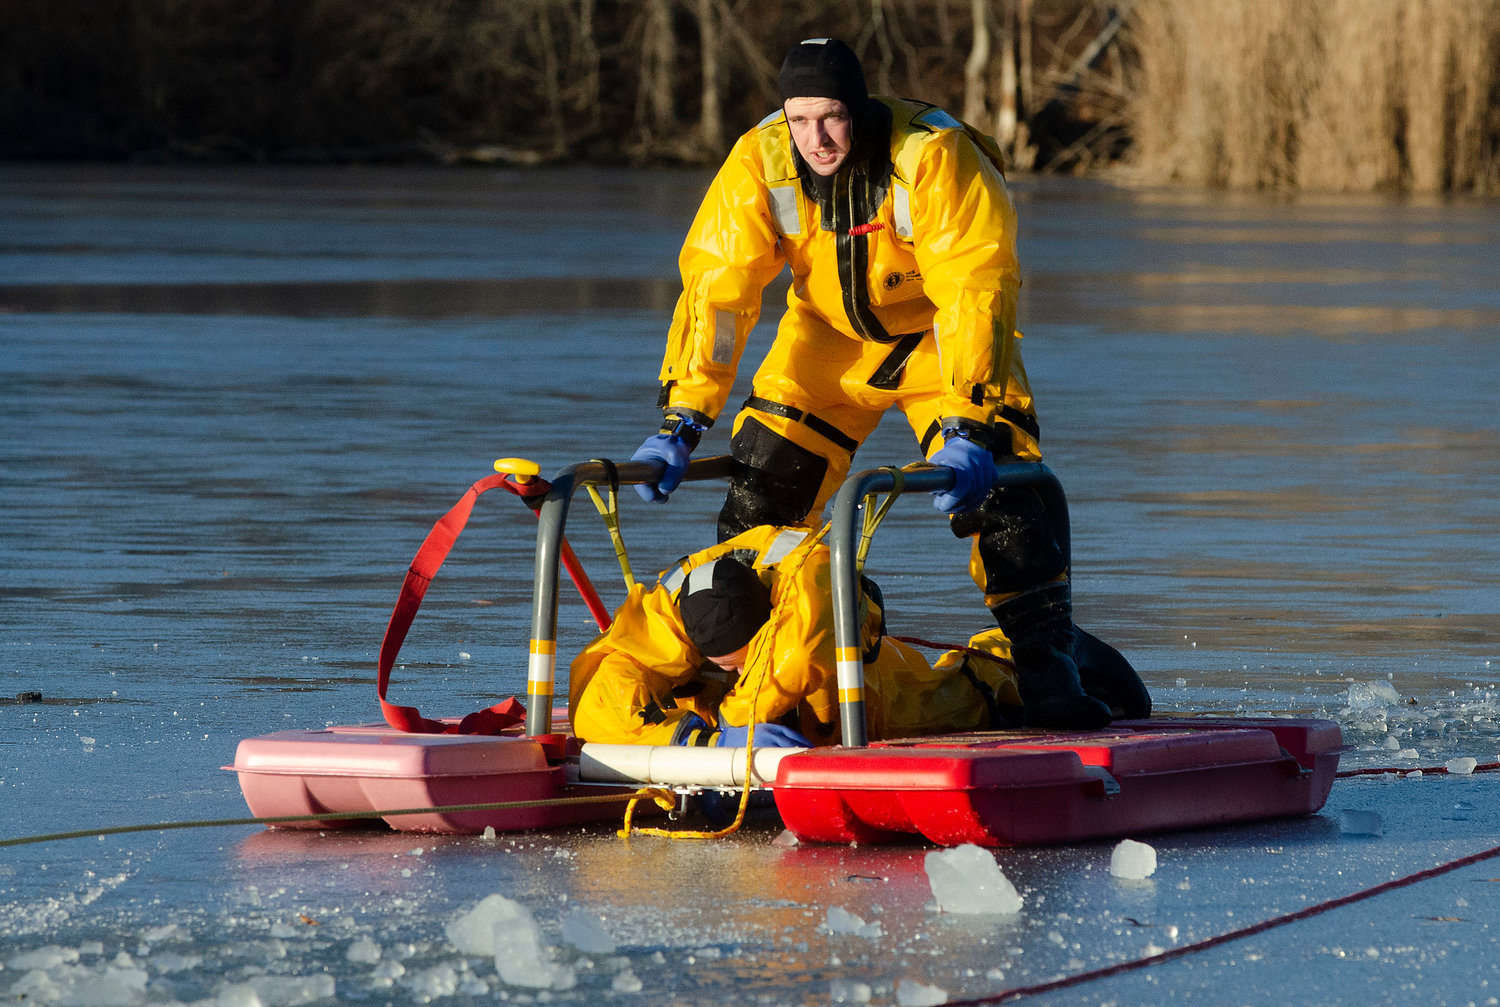 Barrington firefighter Pat Reihl pulls probationary firefighter Jared Pedro from the icy water at Brickyard Pond during an ice rescue training session on Friday afternoon. The firefighters used a special sled that disperses their weight to create better stability and also transitions from water to ice.